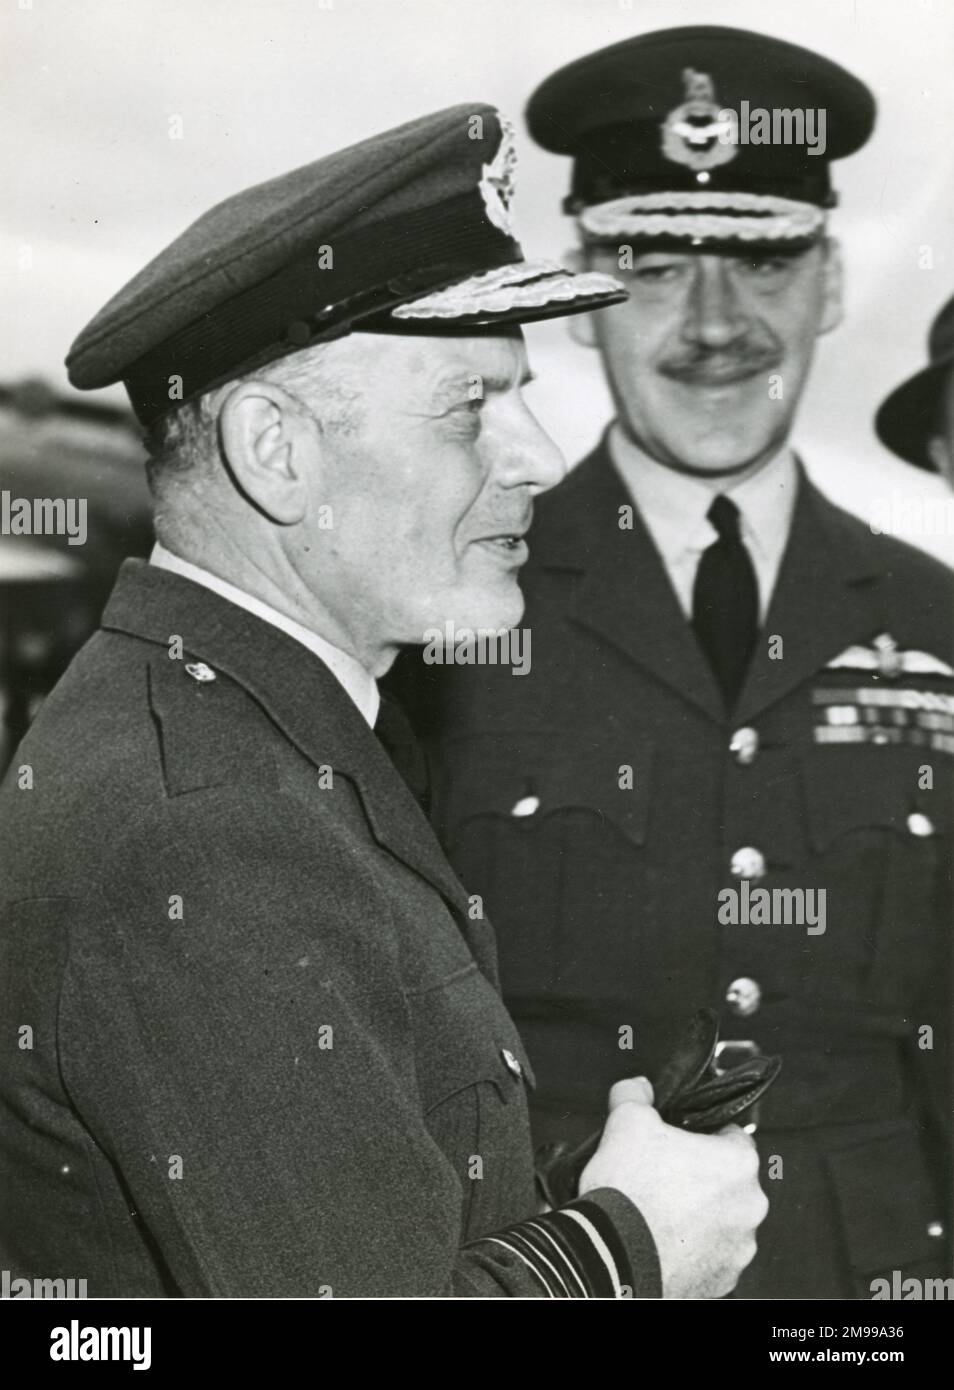 Chief of the Air Staff designate Royal Air Force, Air Chief Marshal Sir William Dickson and Chief of the Air Staff Royal Australian Air Force, Air Marshal Sir Donald Hardman, chat together on the tarmac at RAAF Laverton shortly after Sir William landed in a RAF Hastings. Stock Photo